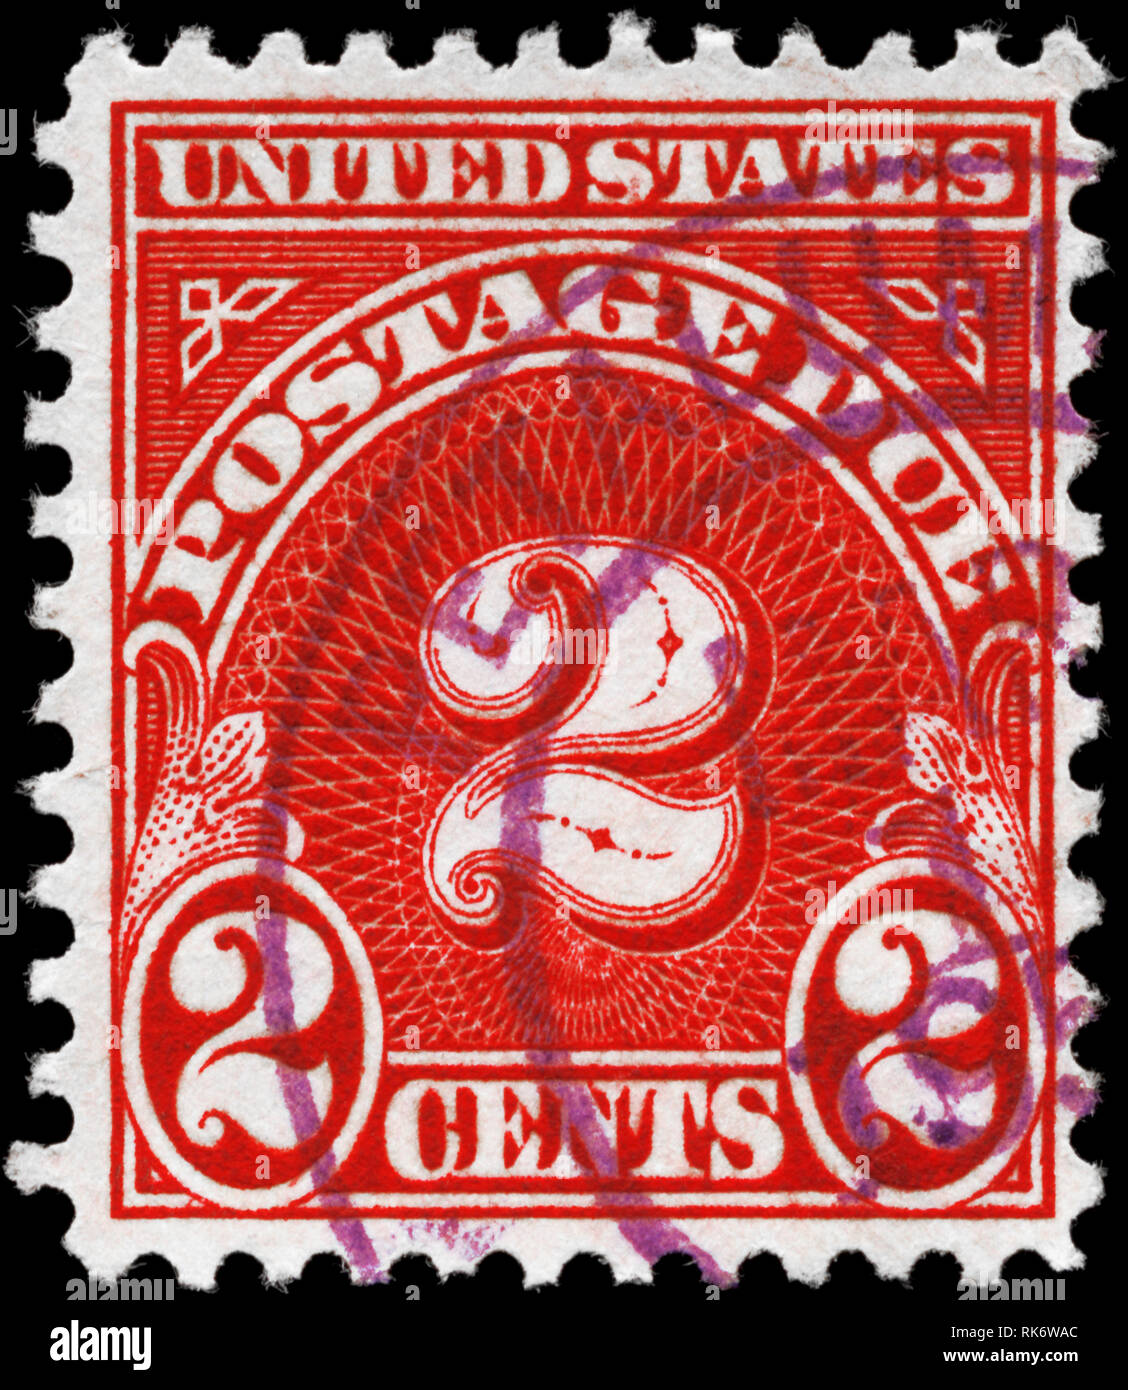 USA - CIRCA 1930: A Stamp printed in USA shows the Stamp with denomination 2c value, circa 1930 Stock Photo